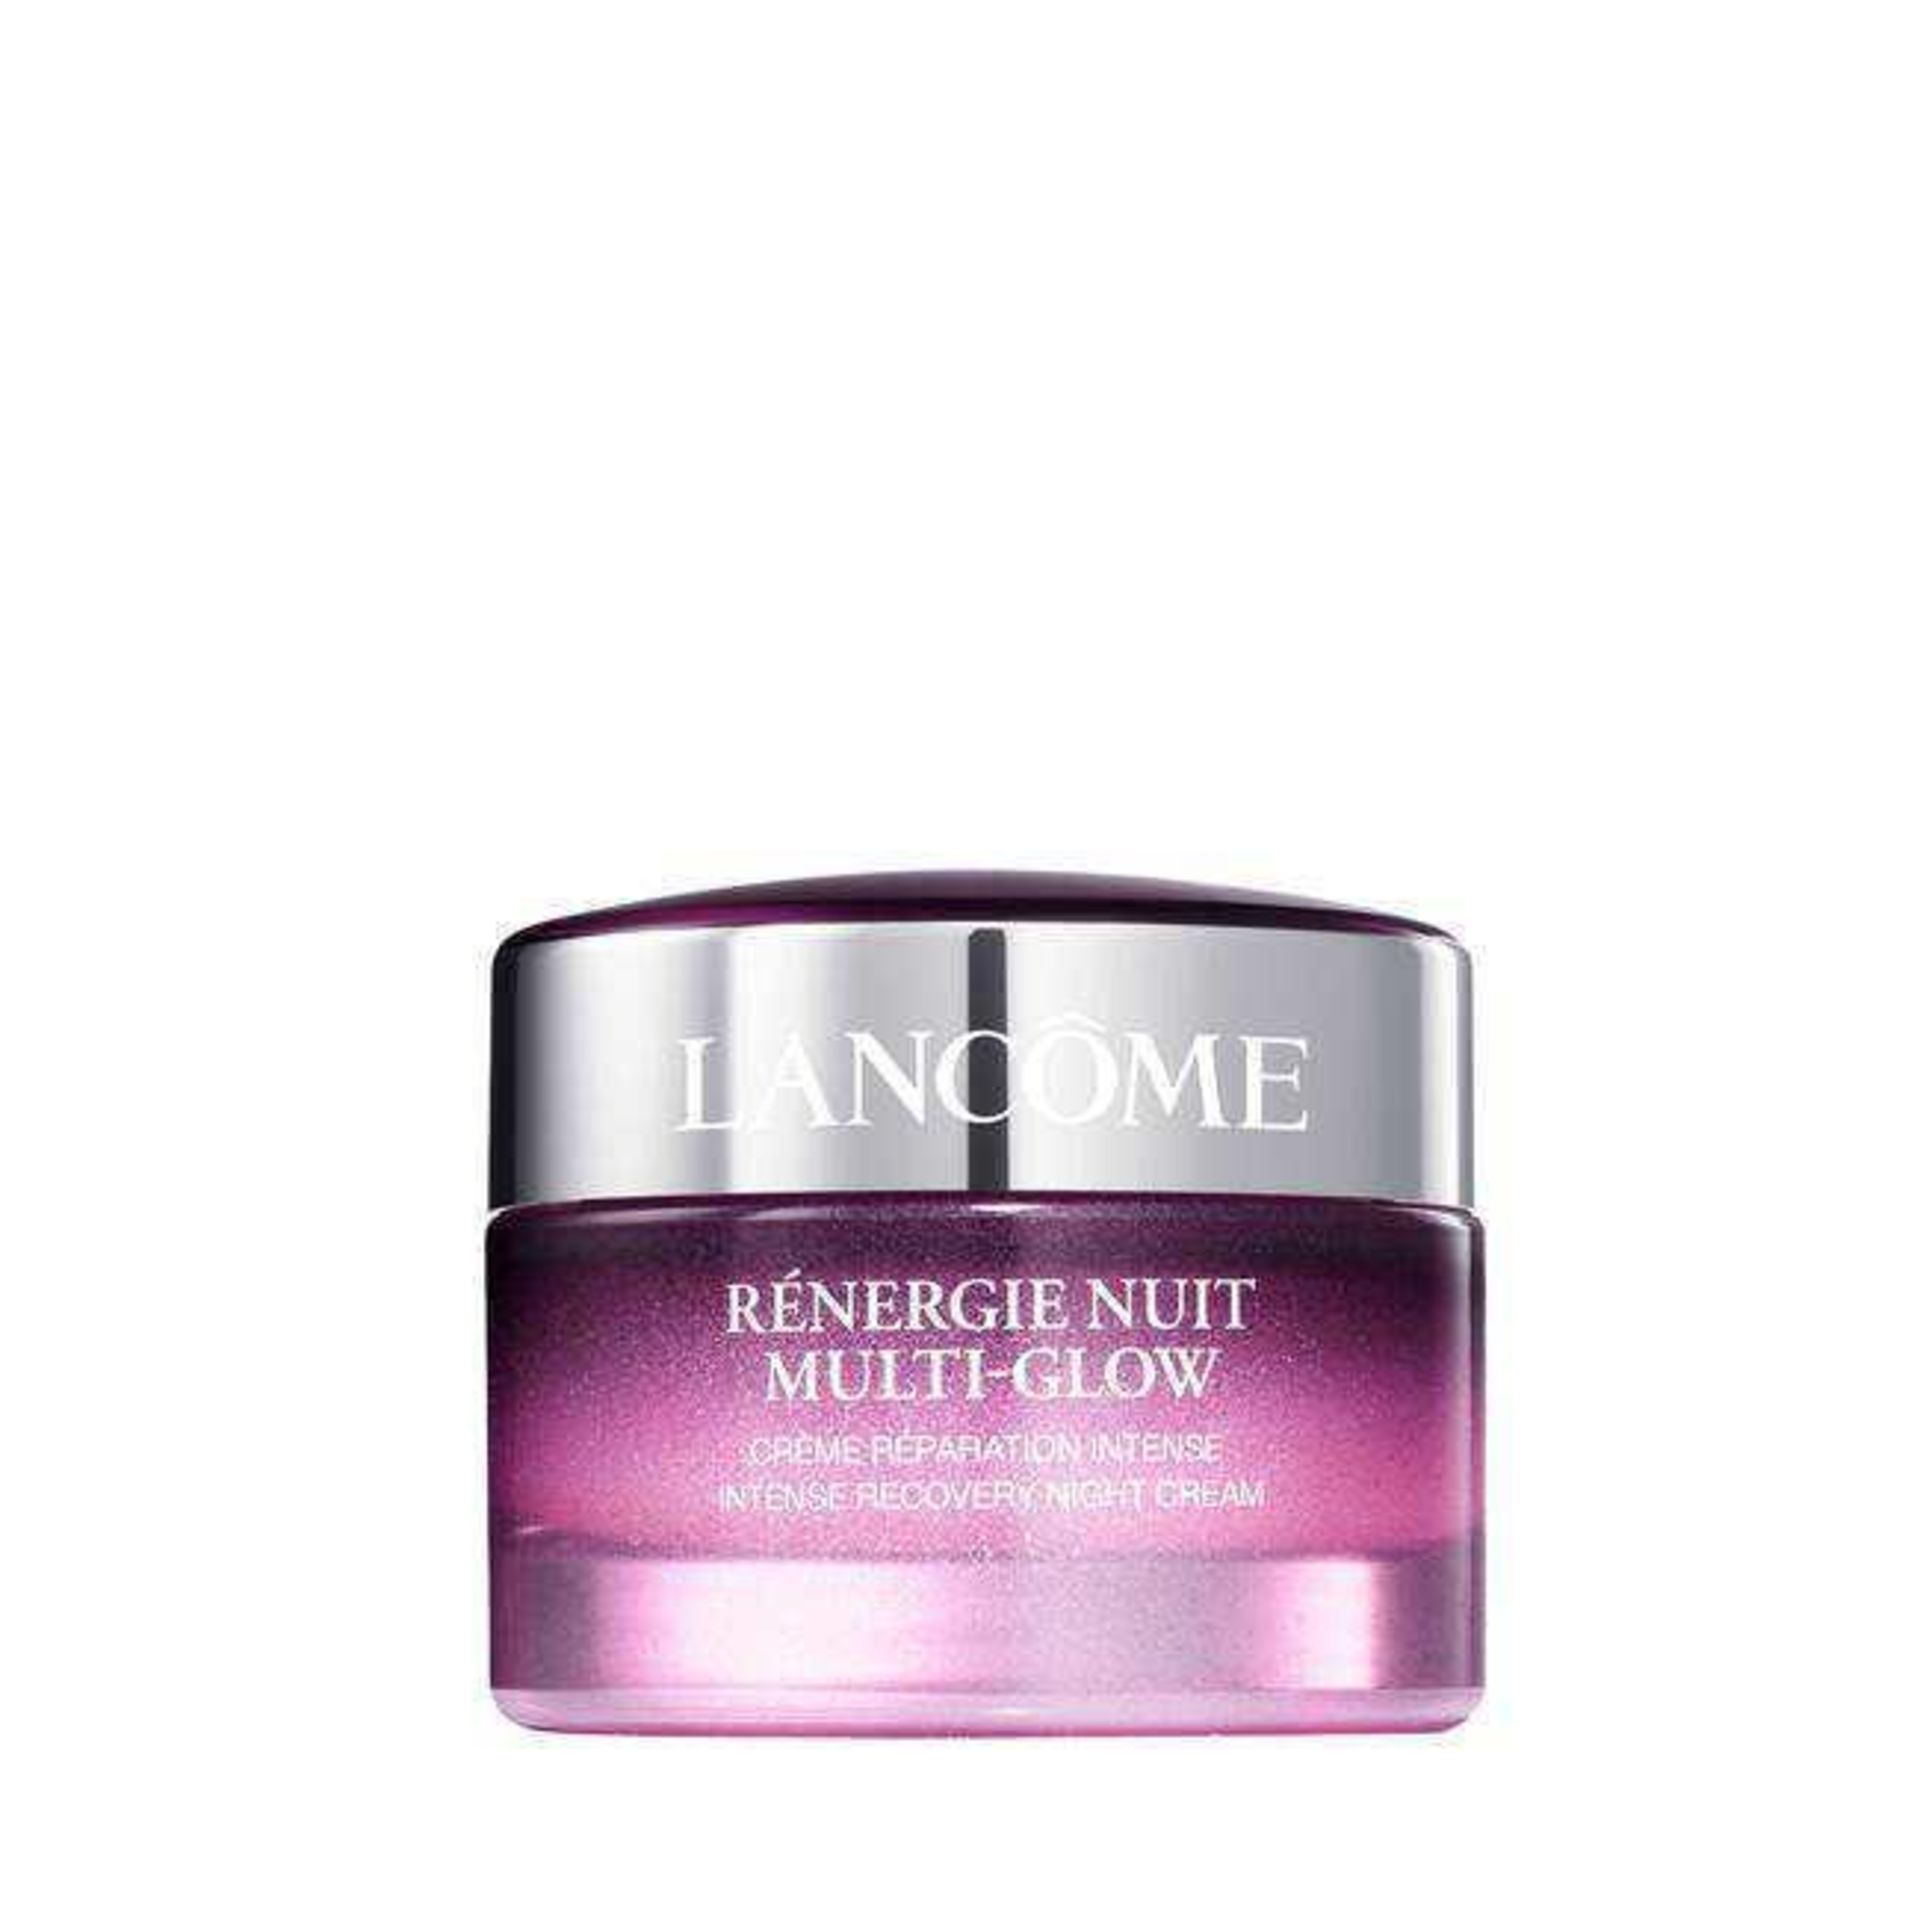 RRP £70 Brand New Boxed And Sealed Tester Of Lancôme Paris Renergie Nuit Multi Glow 50Ml Firming An - Image 3 of 3